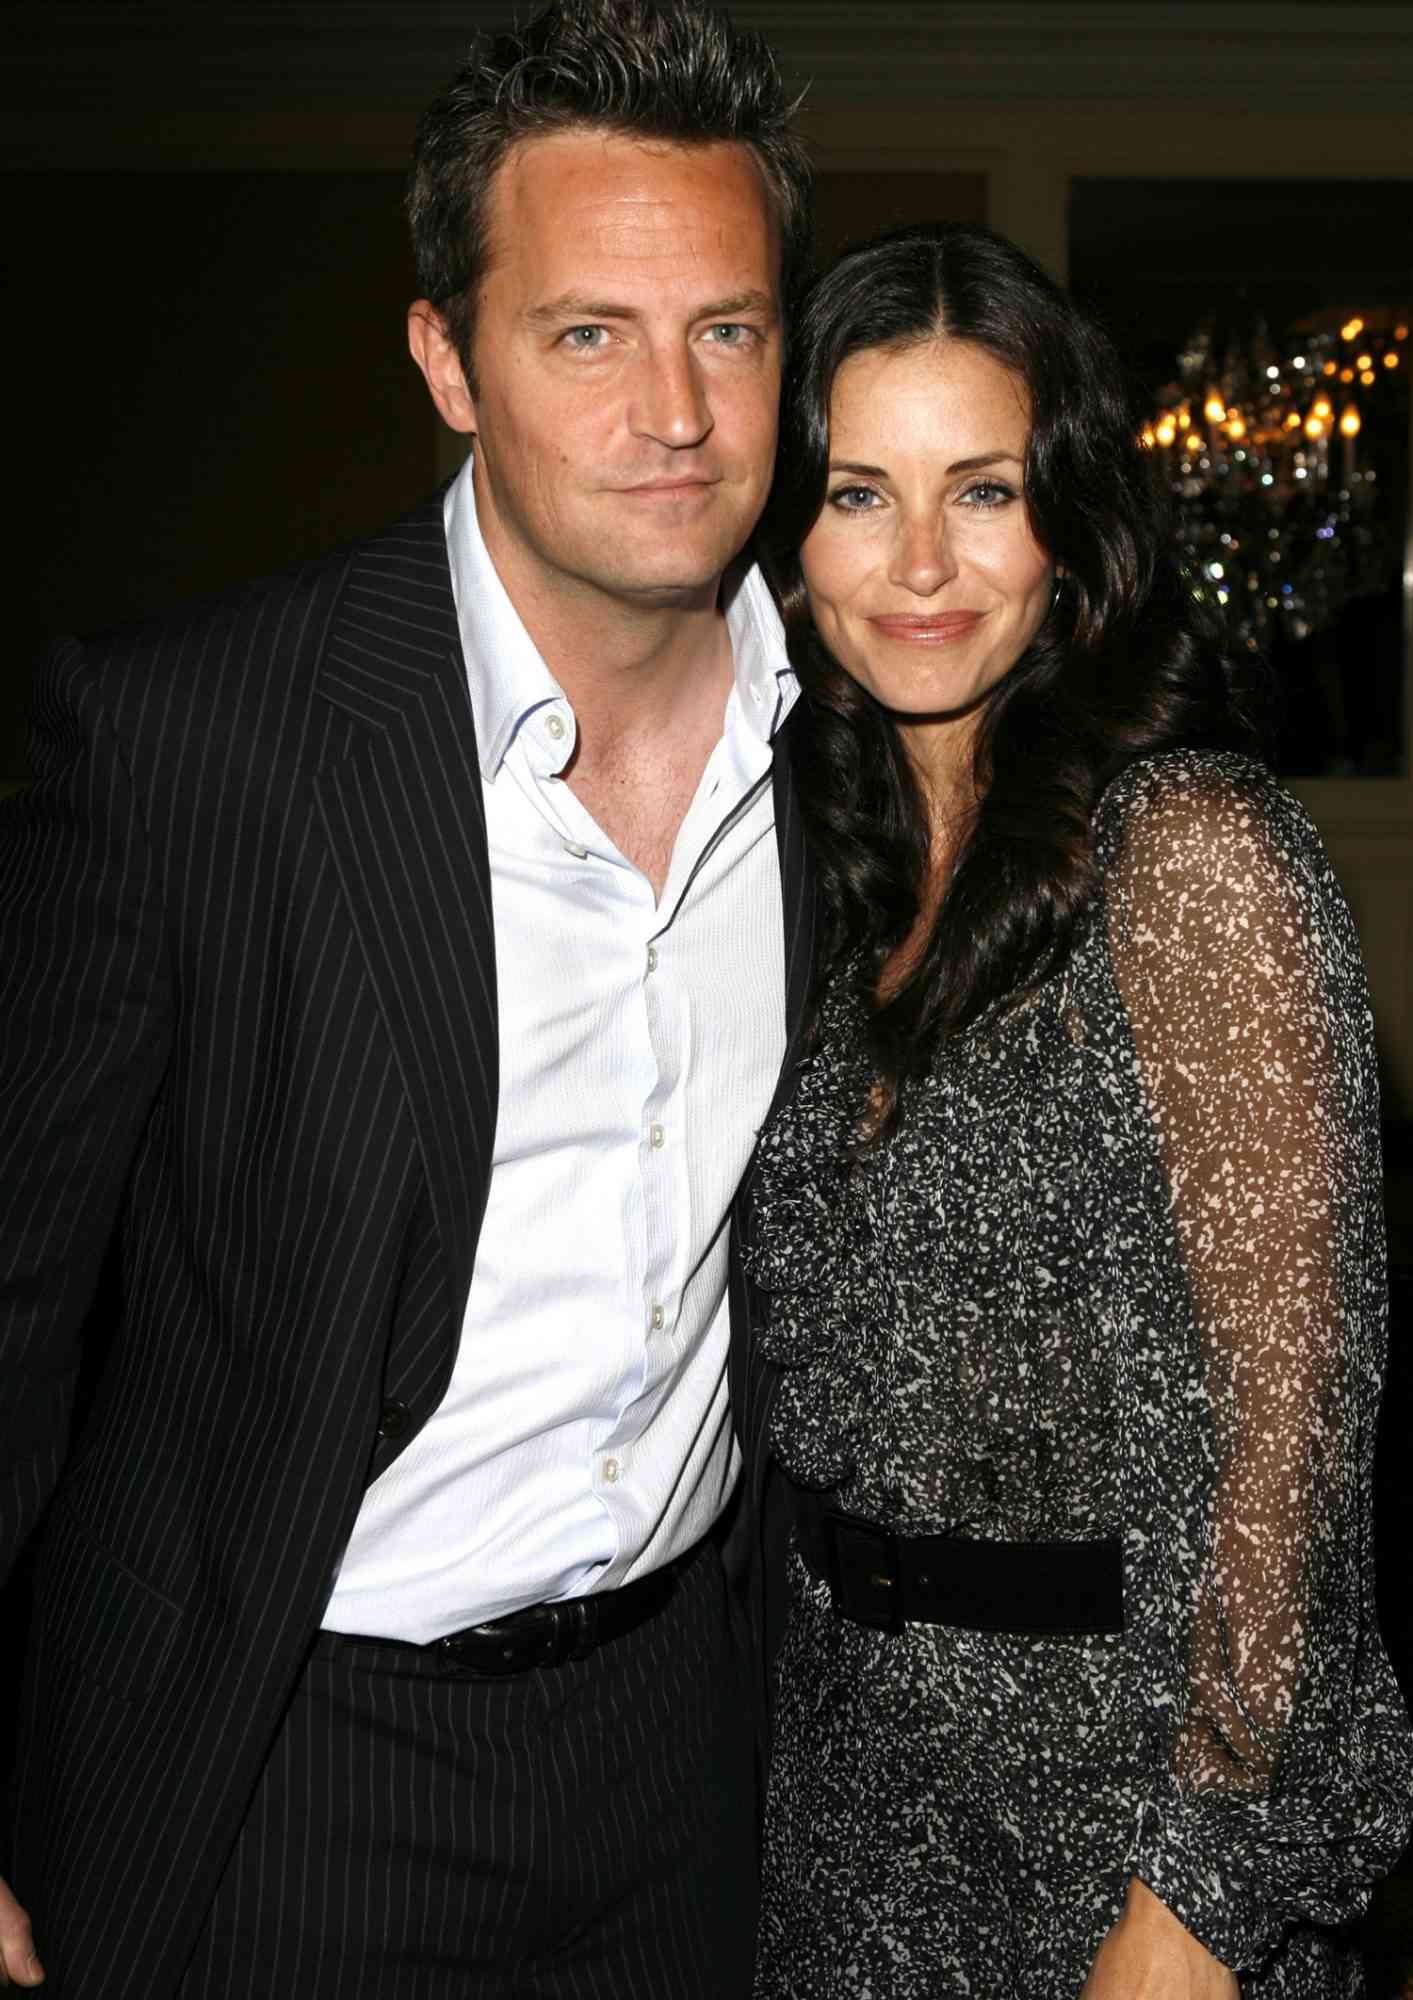 Courteney Cox Says Matthew Perry 'Visits Me a Lot' After His Death and She Can 'Sense' When He's 'Around'